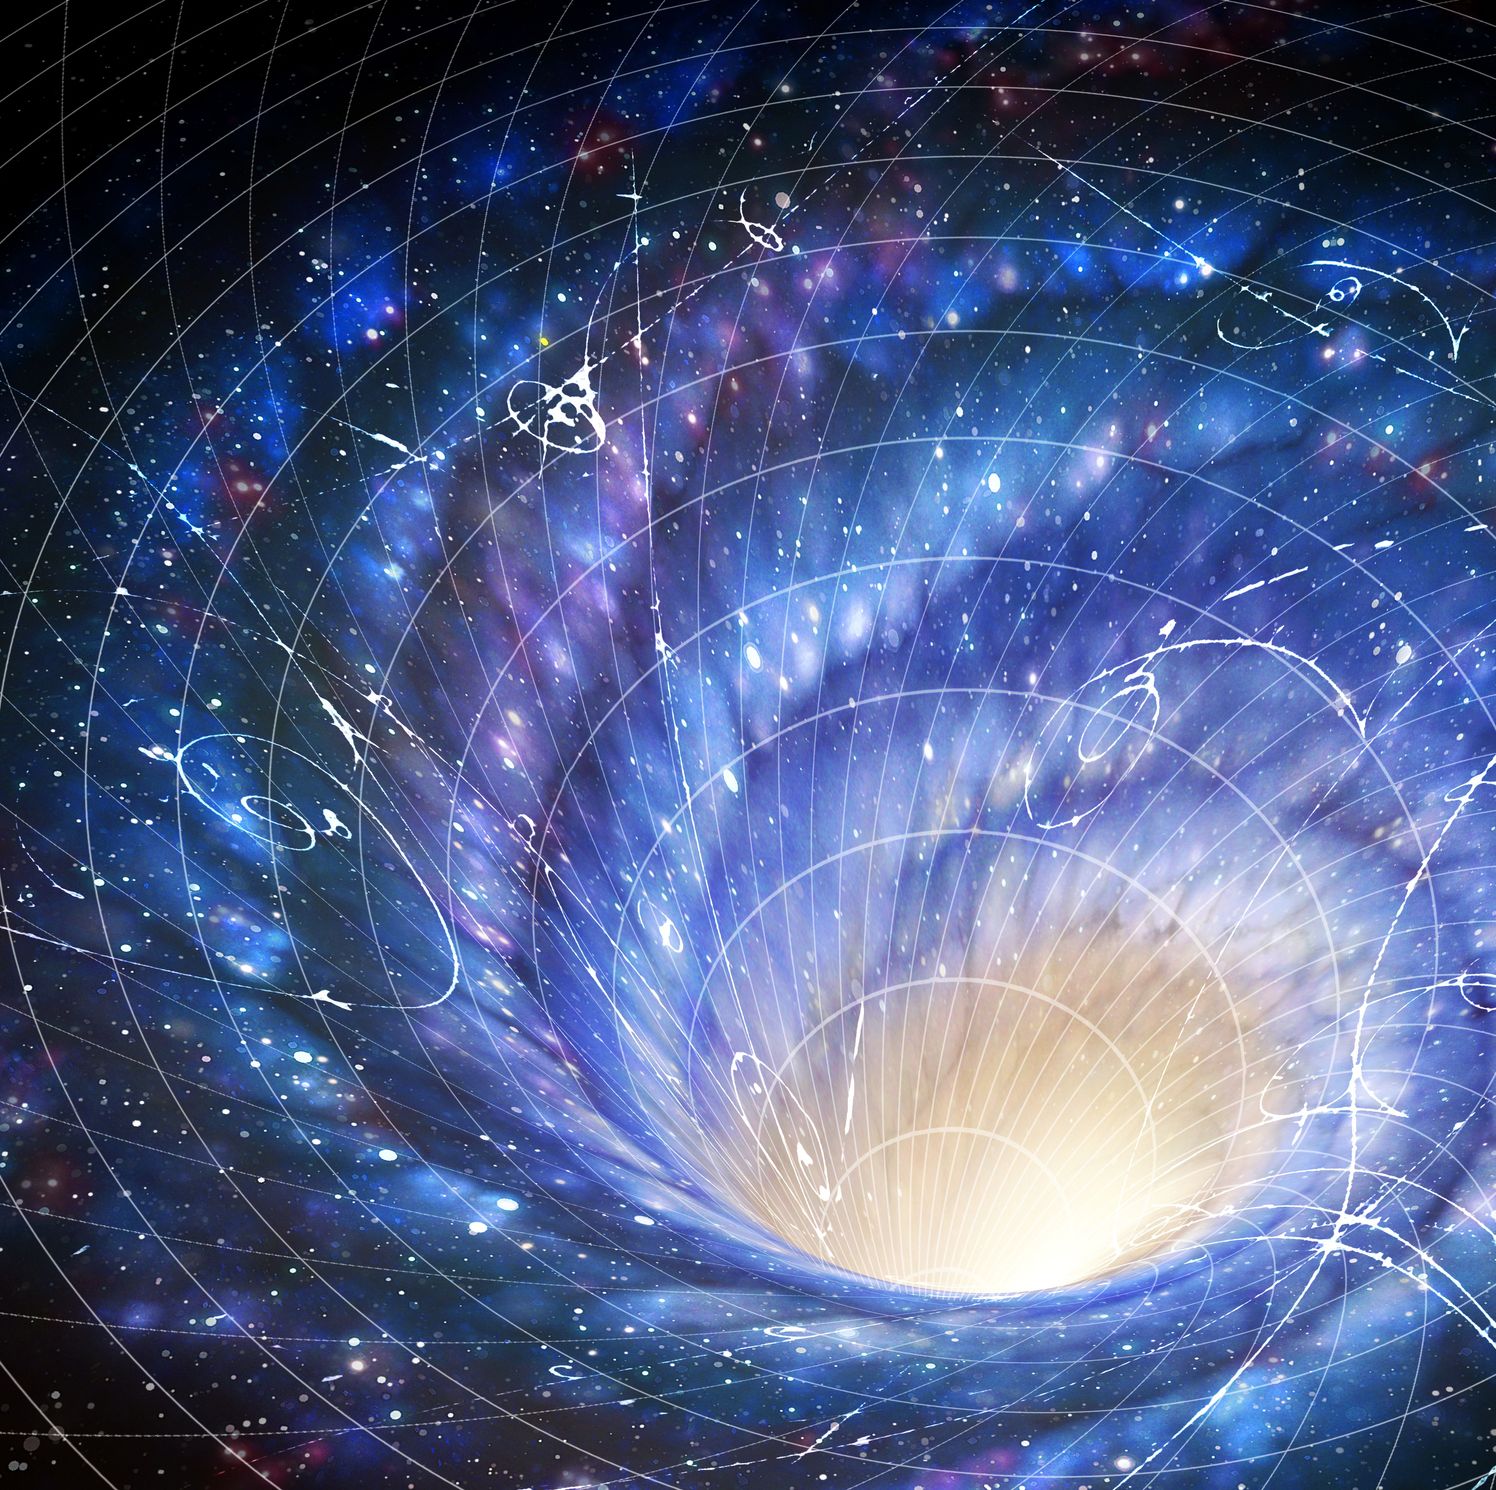 Can 'Wobbly Spacetime' Answer Physics' Biggest Question?